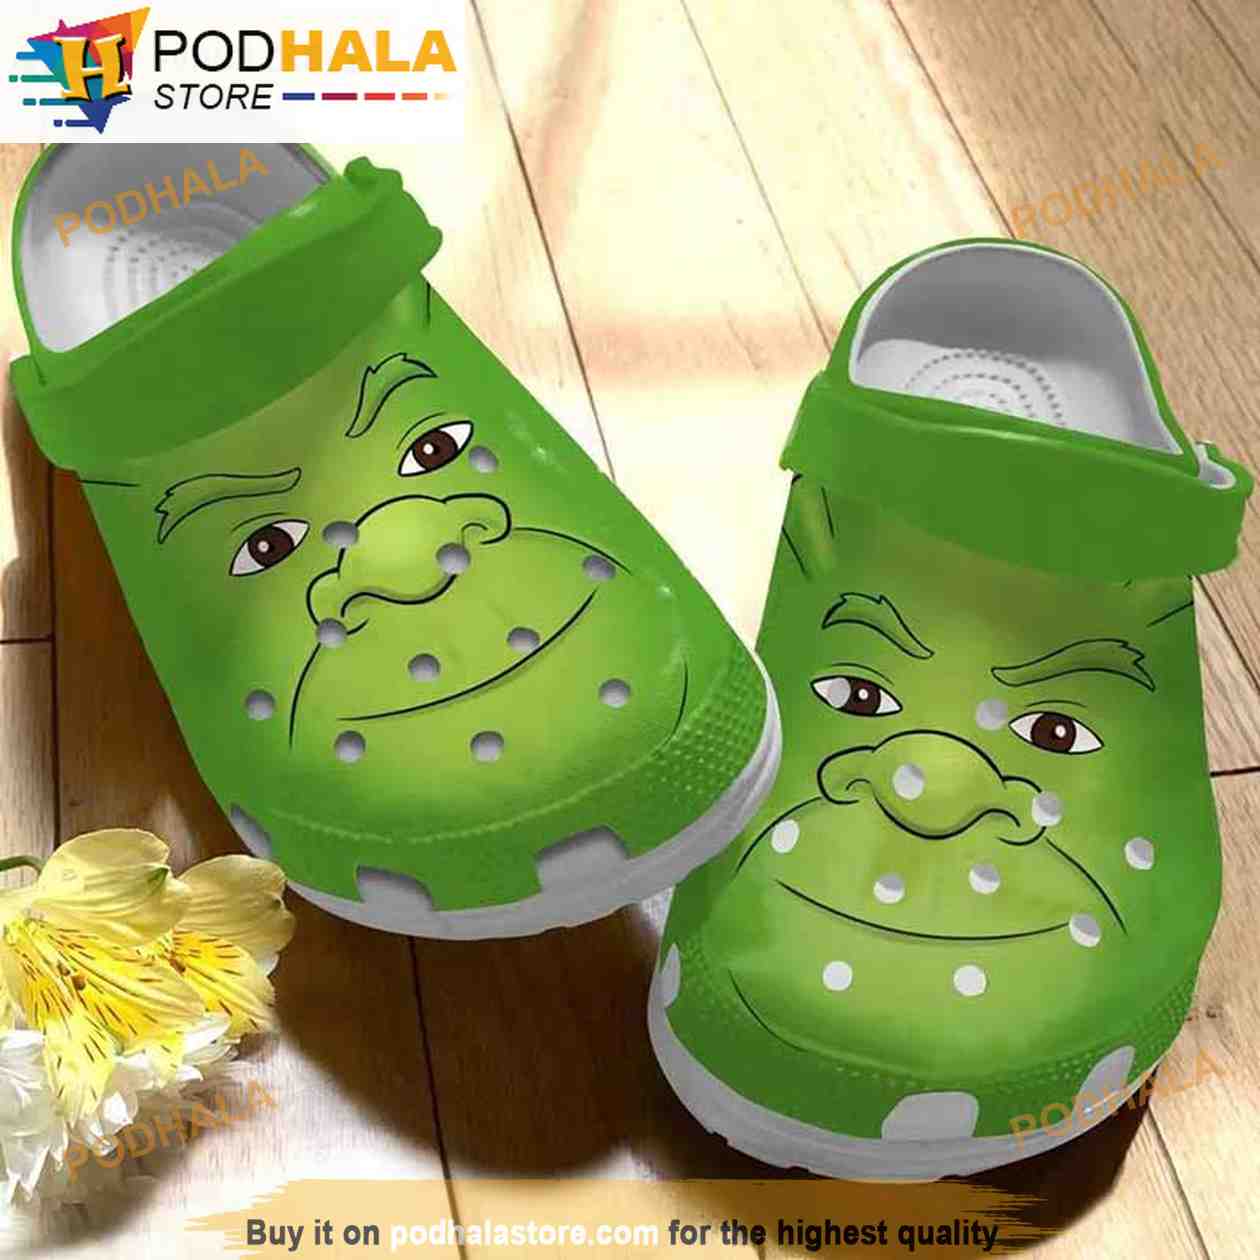 Shrek-Themed Crocs Are Available Now - PureWow